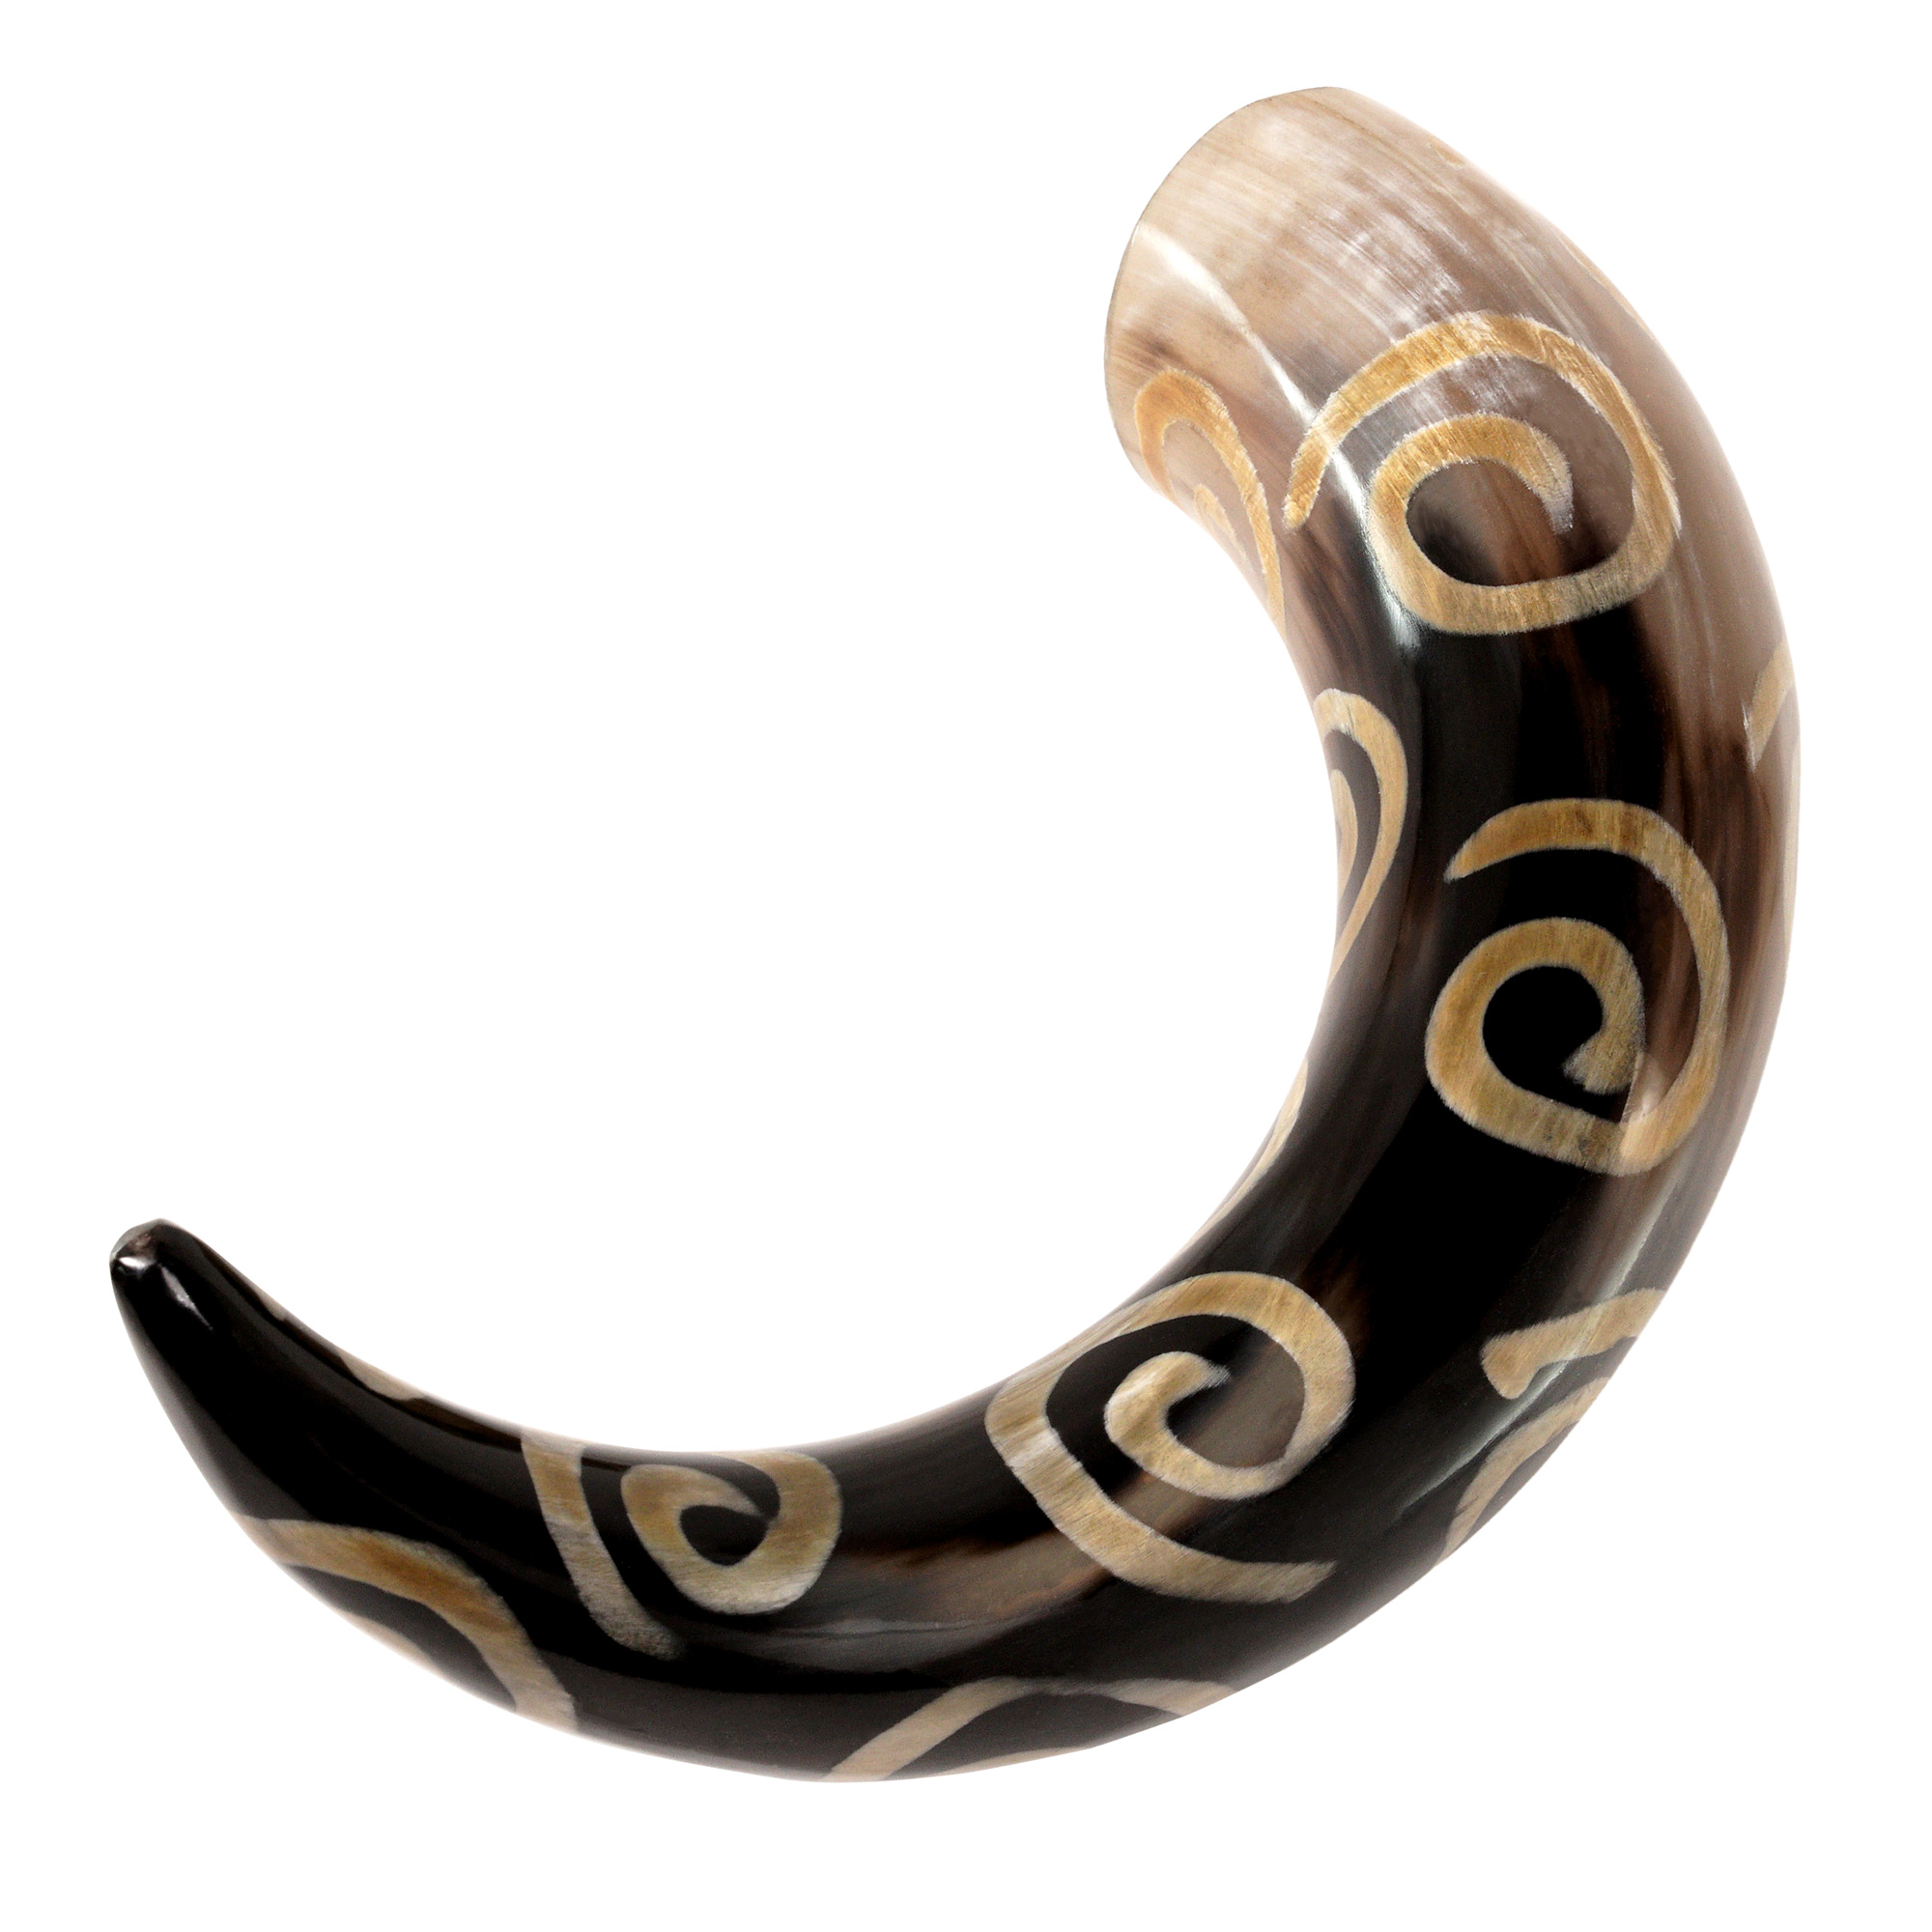 Bovine Drinking Horn Medieval Swirl Design With Rack Stand Functional Decor